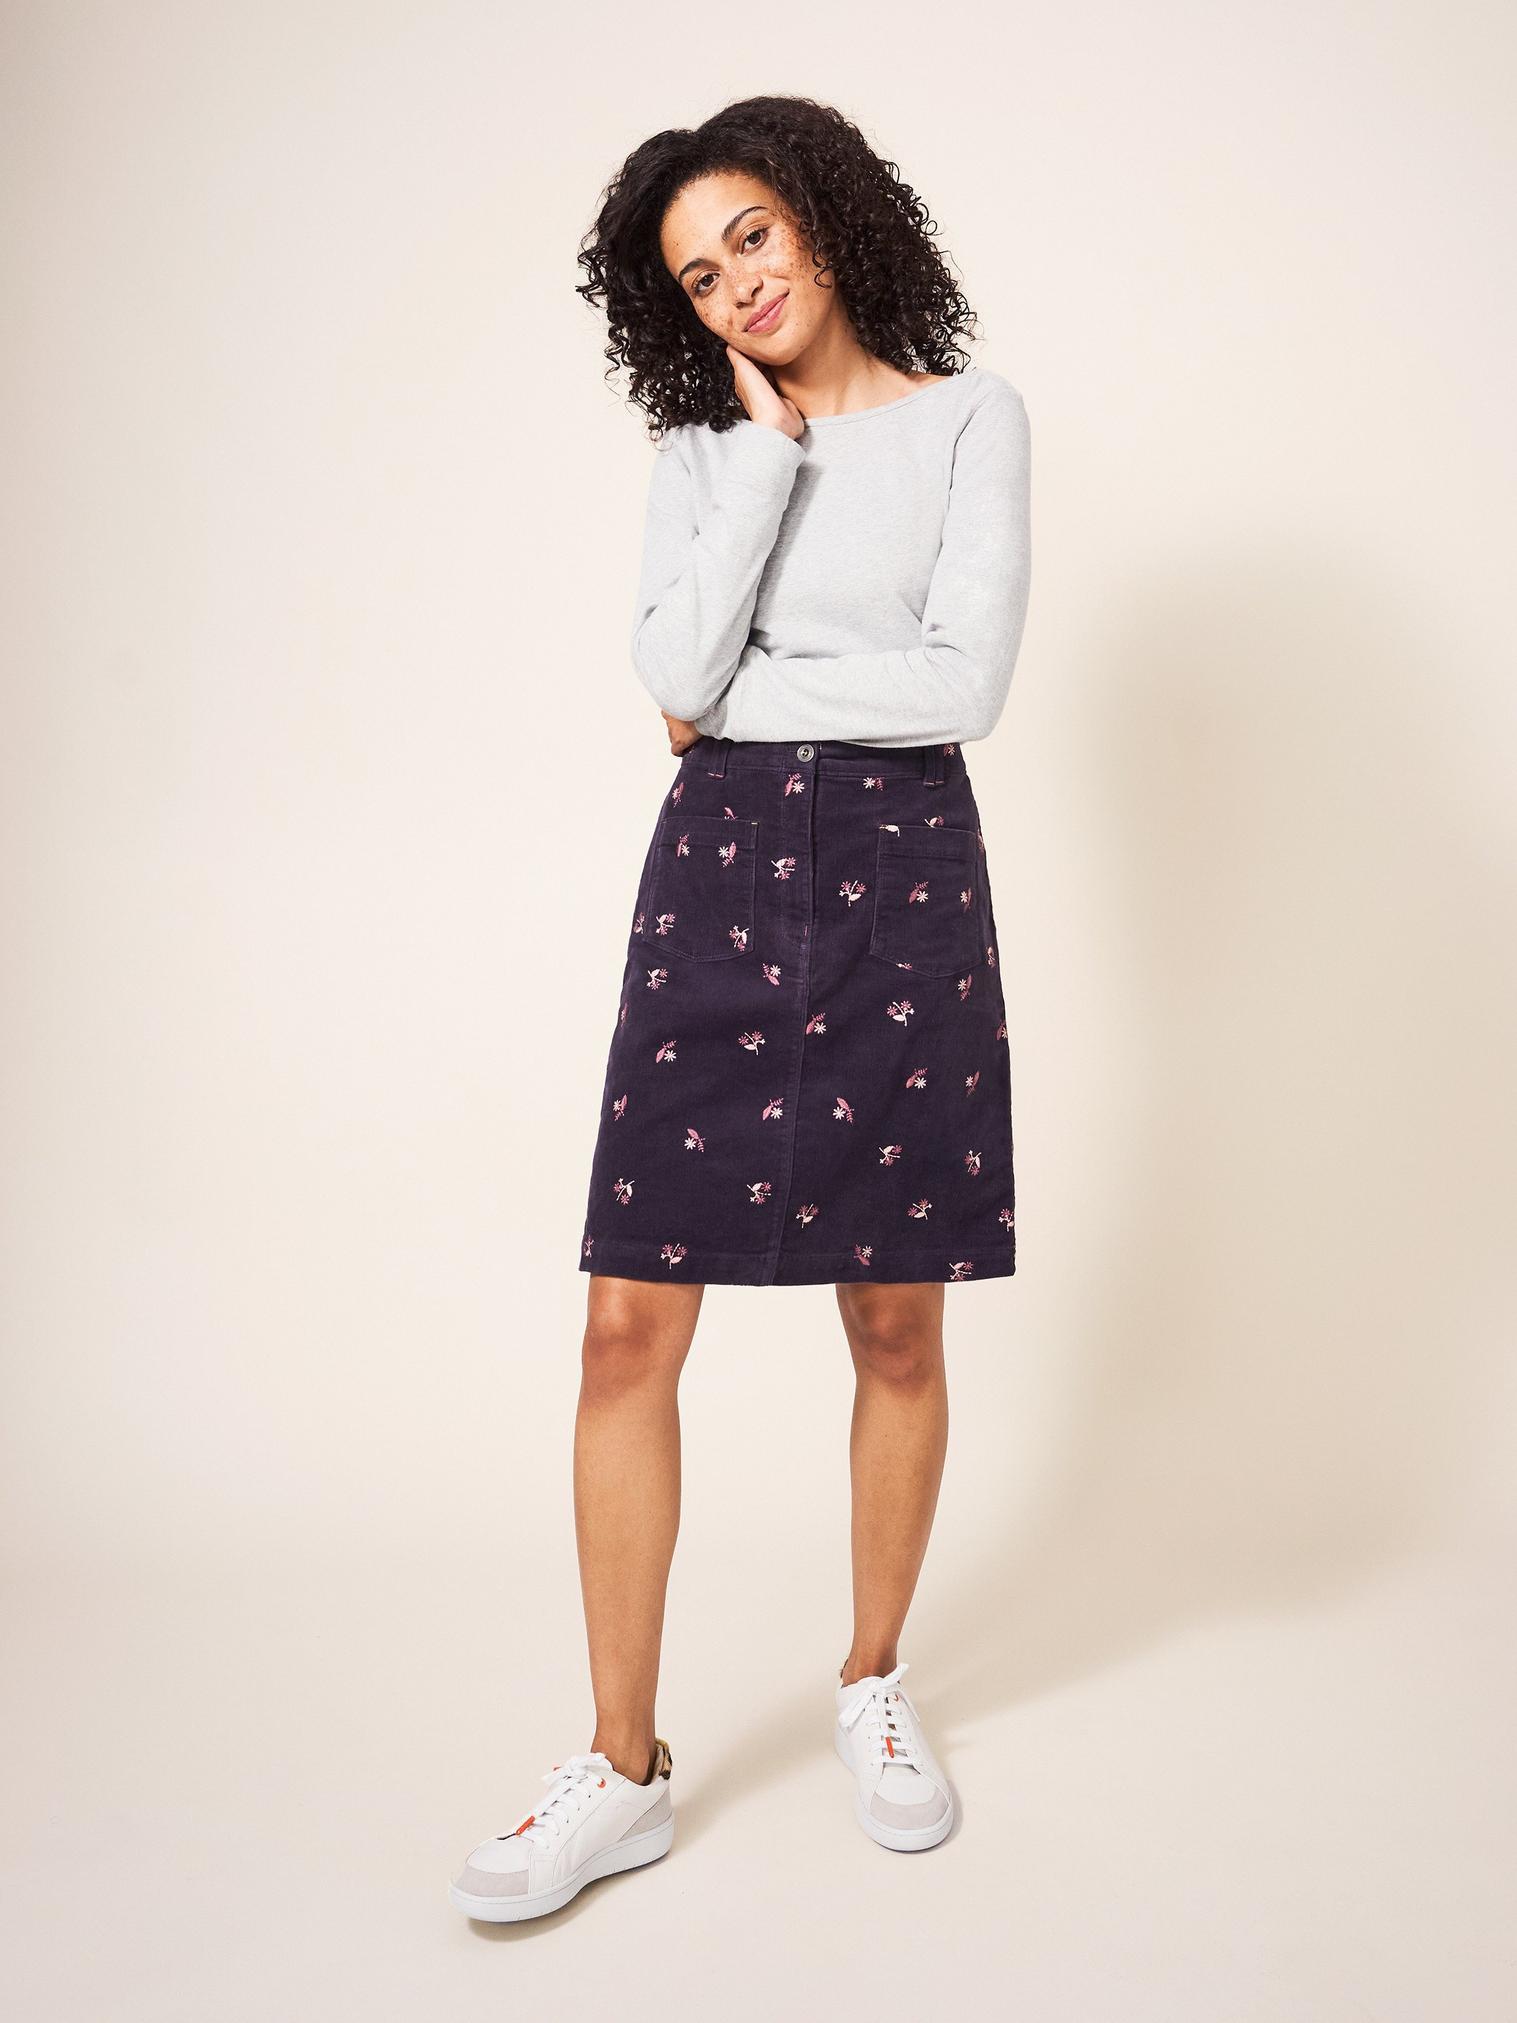 Melody Cord Skirt in PURPLE MLT - LIFESTYLE